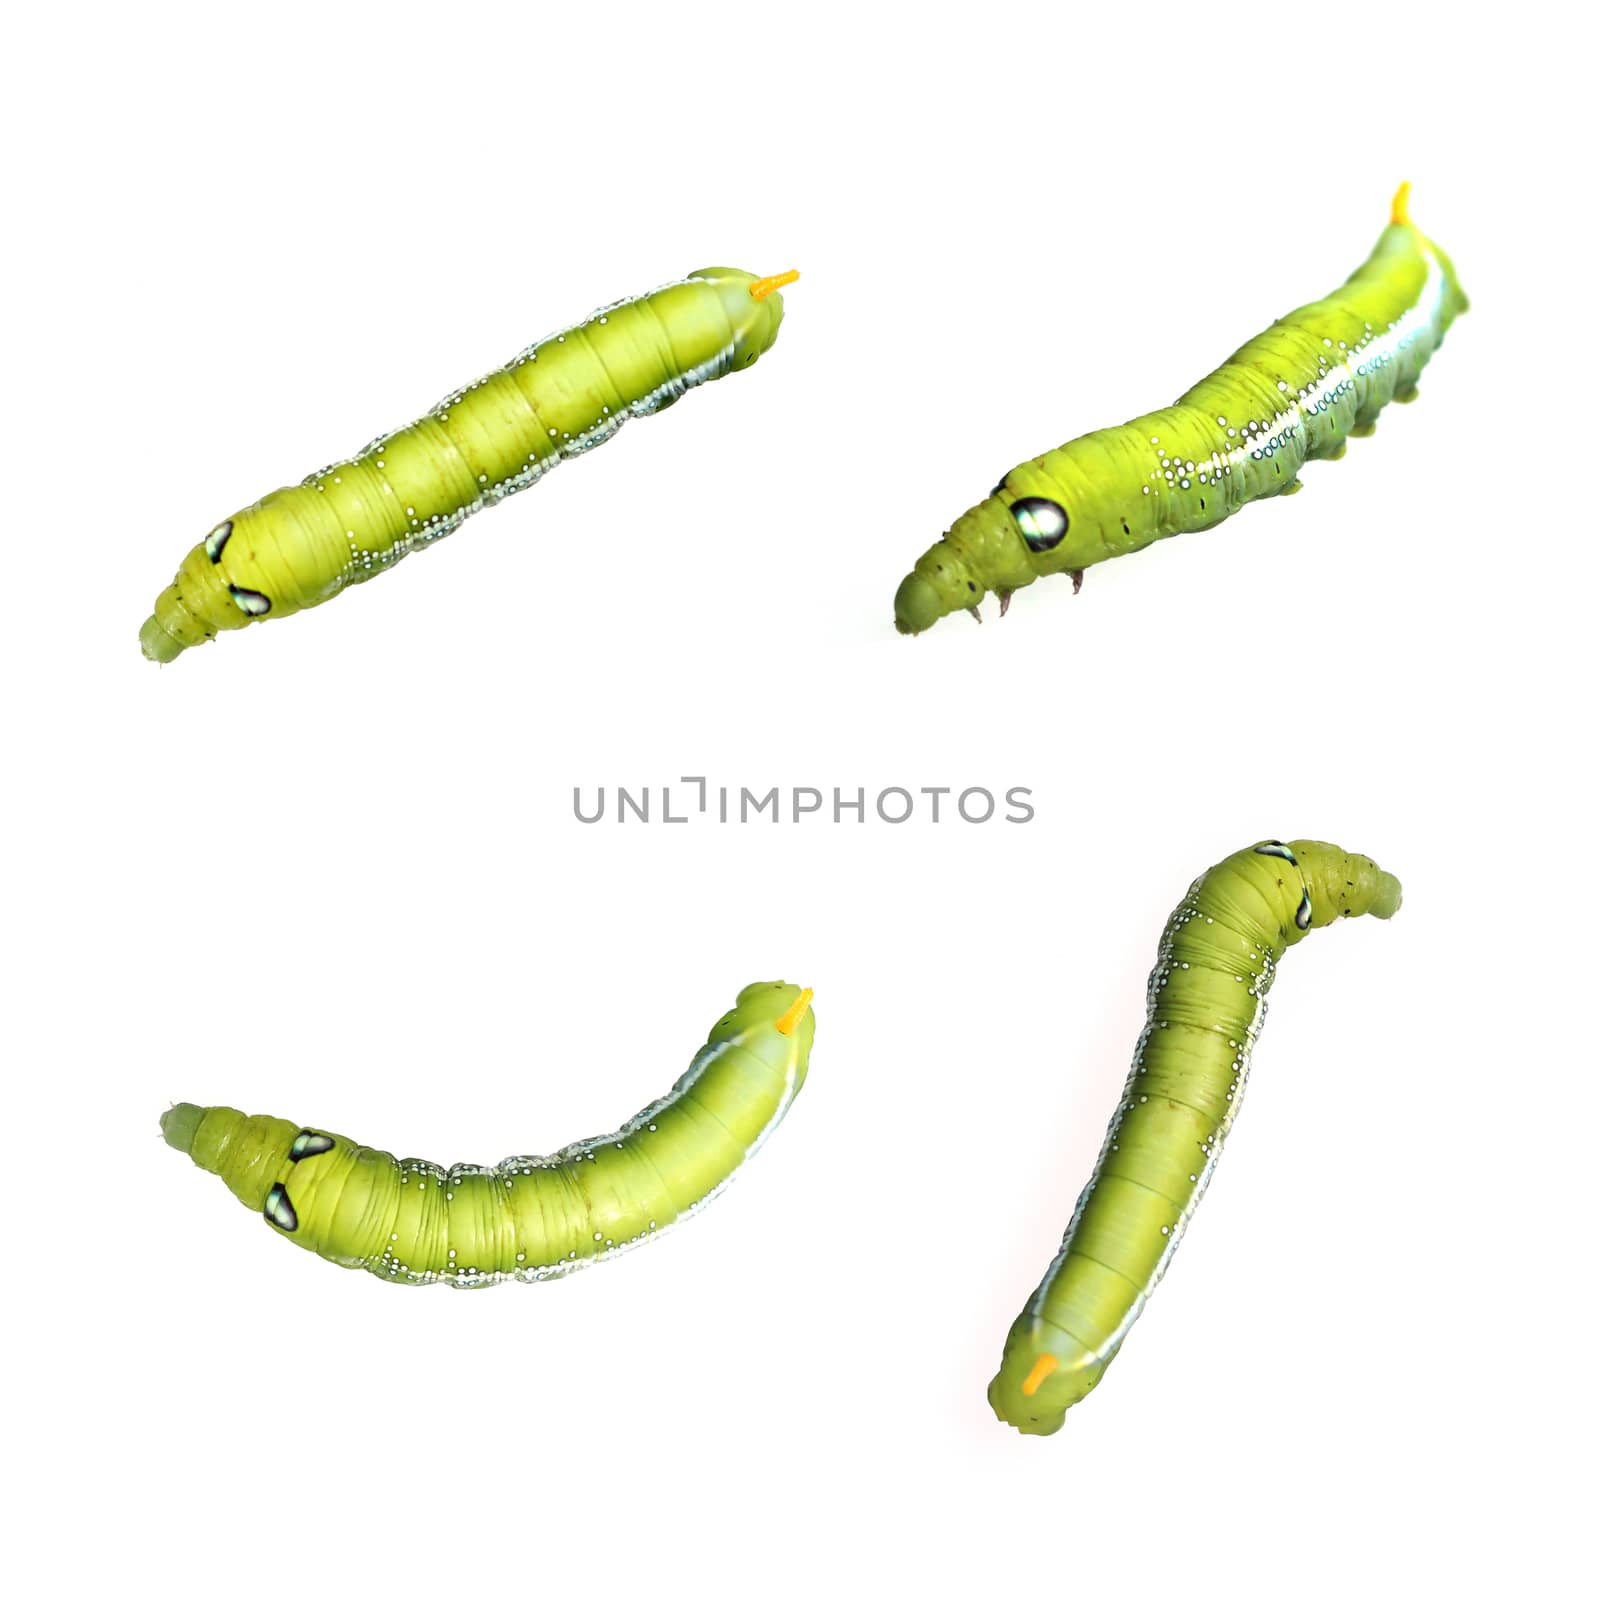 Image of Green Caterpillar on white background.